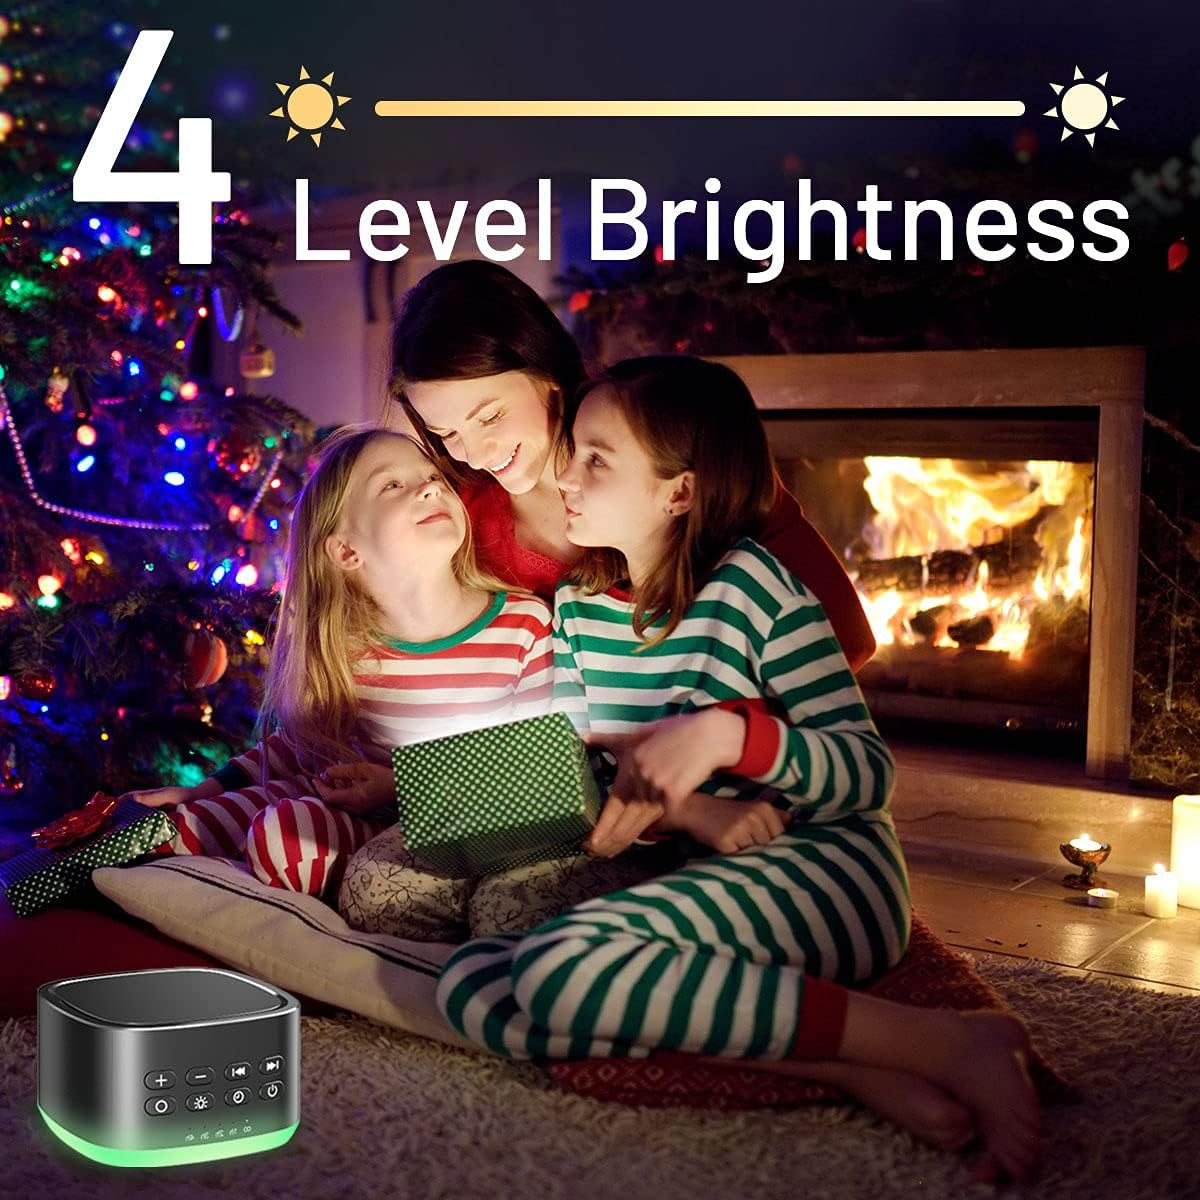 White Noise Machine 10 Colors Lights and 25 Soothing Sounds Sleep Sound Machine with 5 Timers with Memory Feature Portable Sound Machine for Baby Adults. (Black)